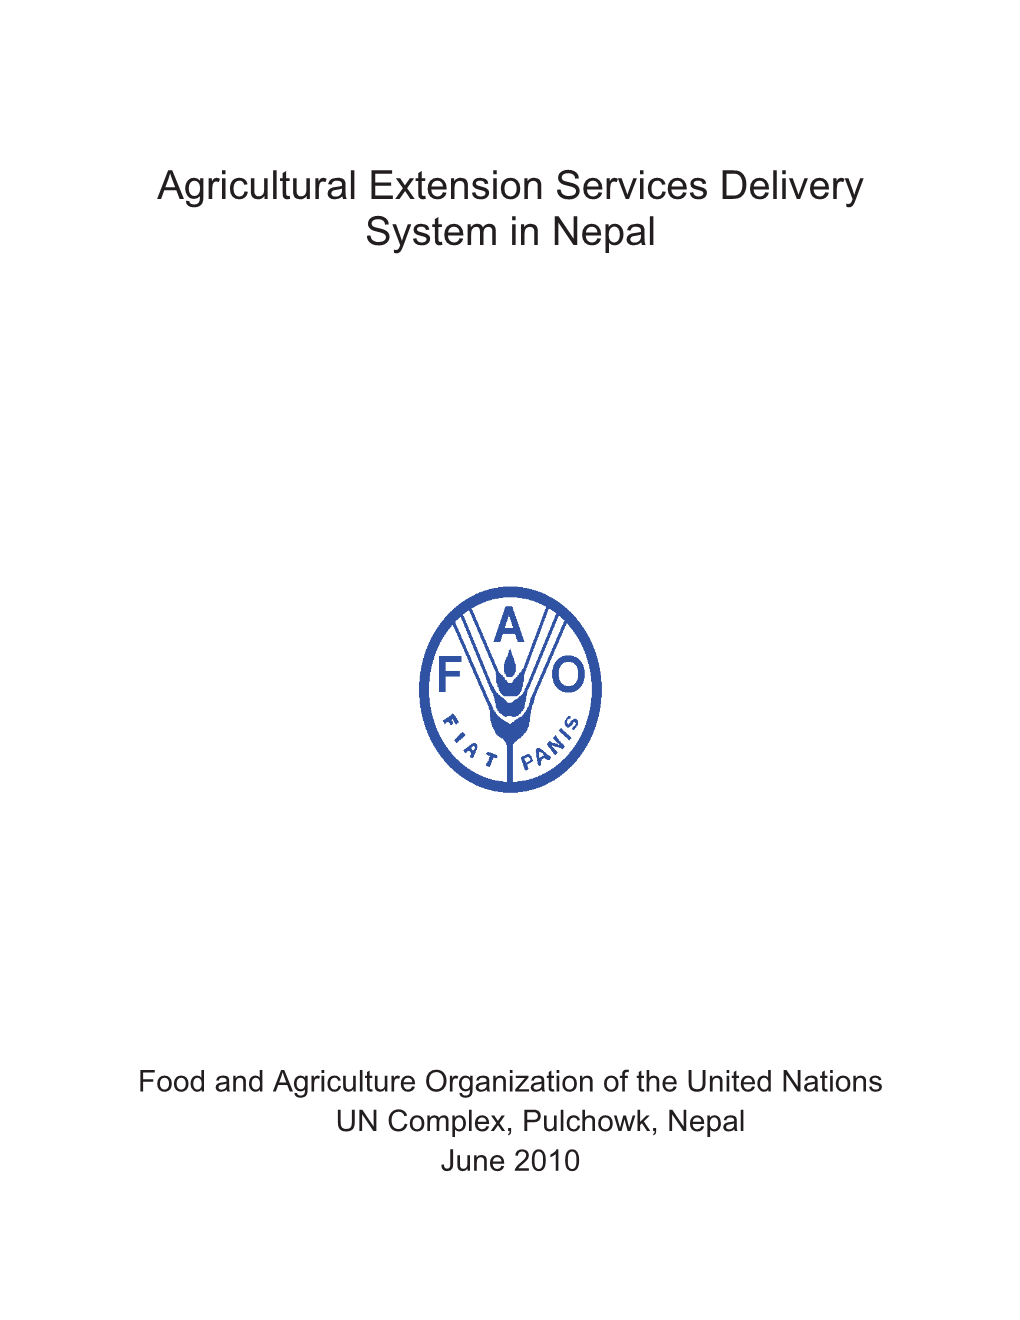 Agricultural Extension Services Delivery System in Nepal